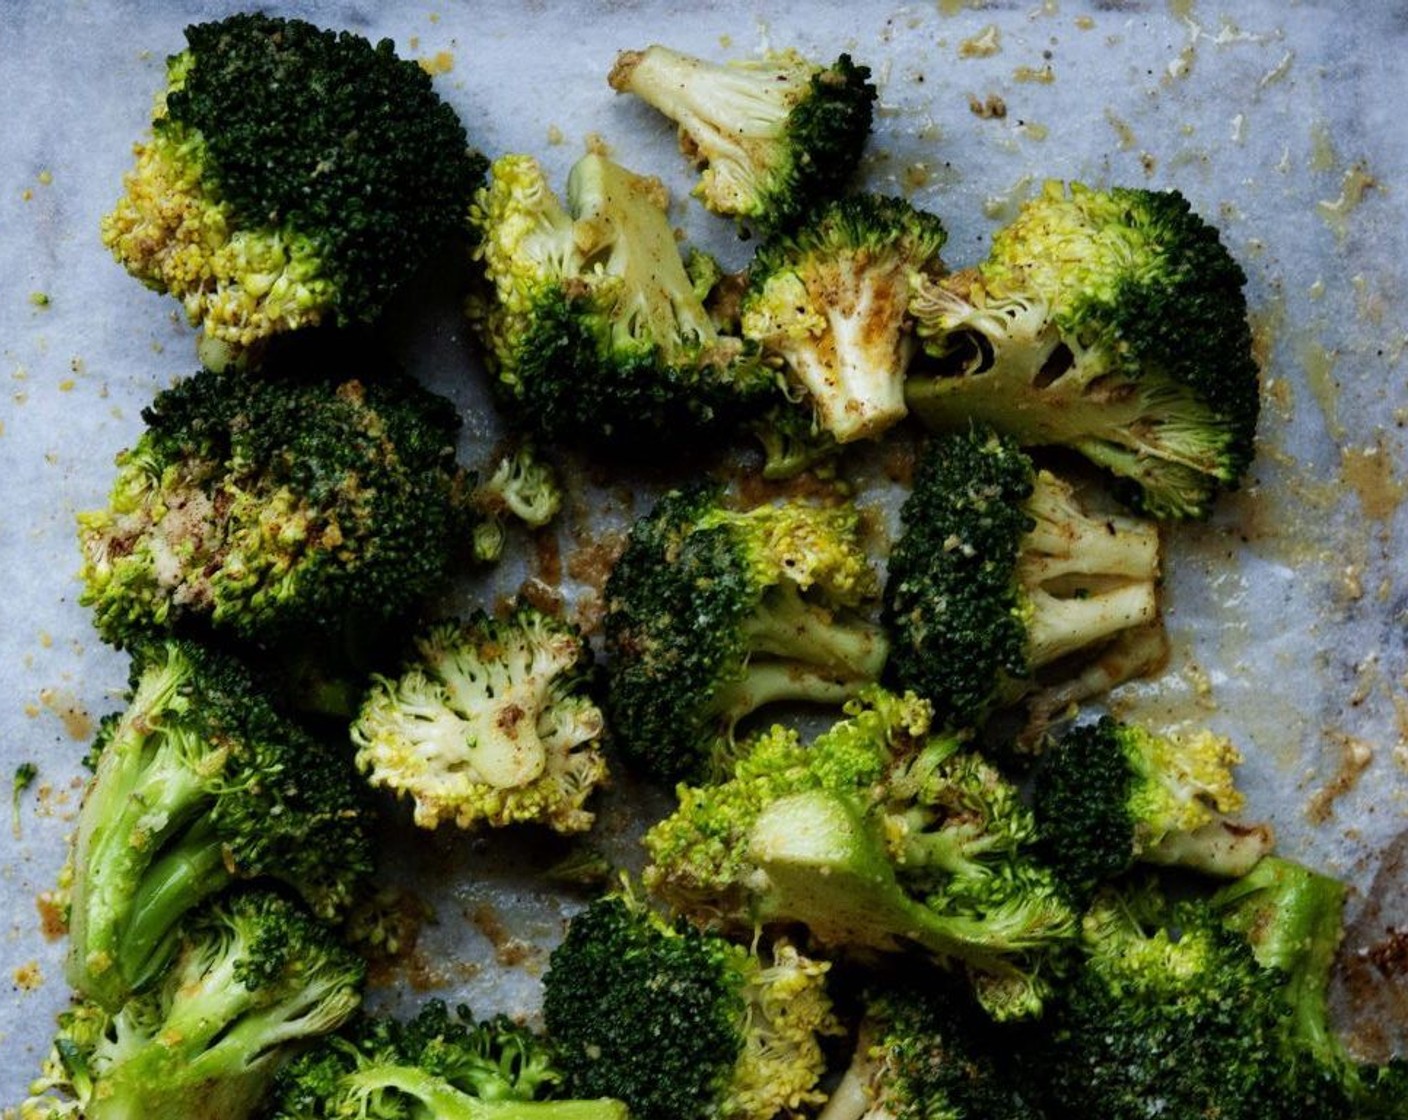 step 3 Mix everything together until the broccoli is well-coated.